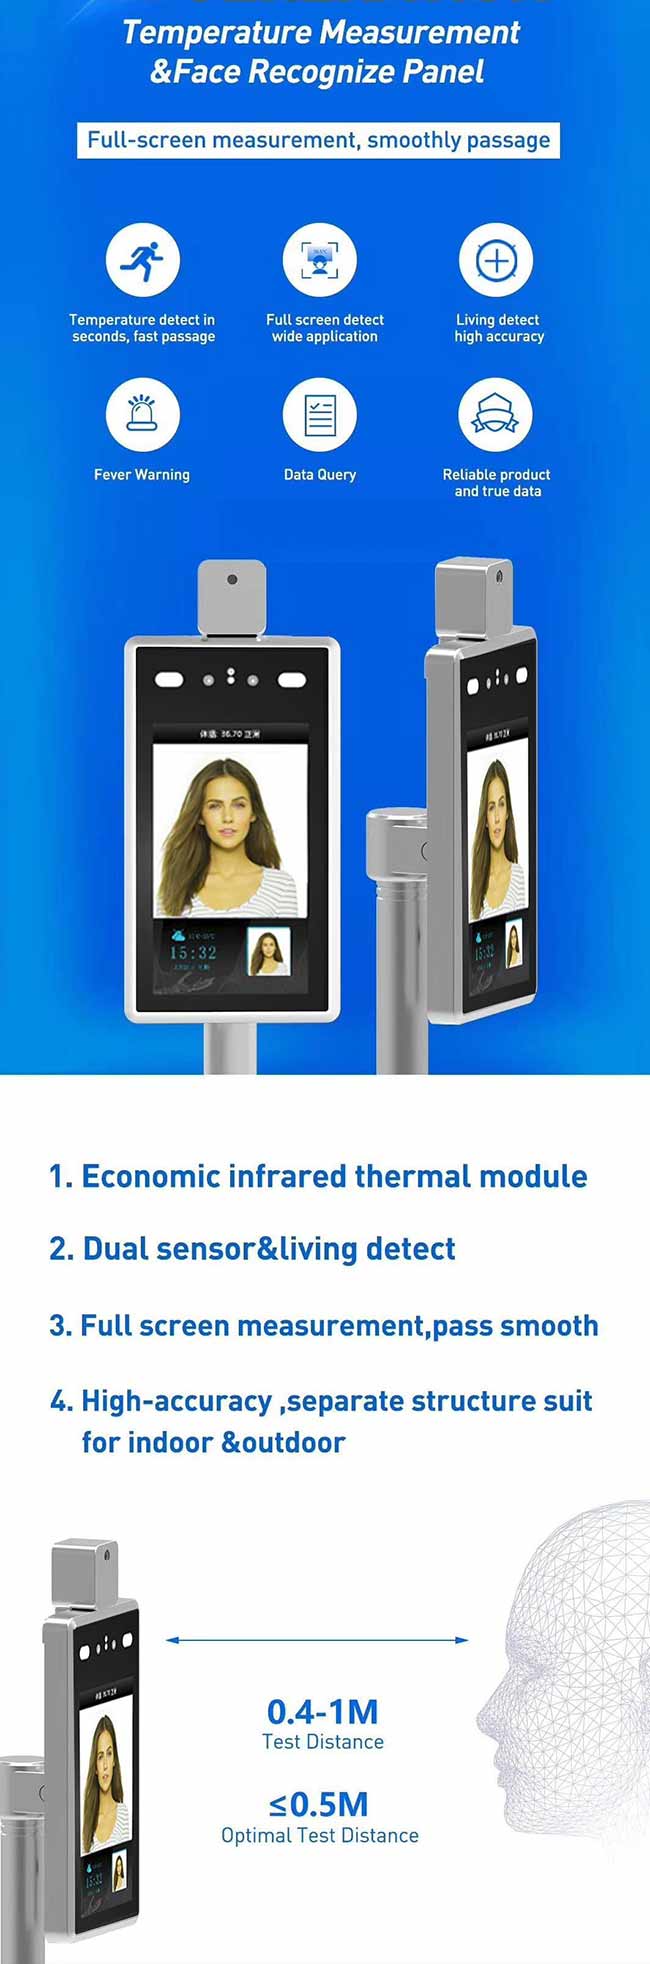 Facial Recognition and Temperature Detection Camera